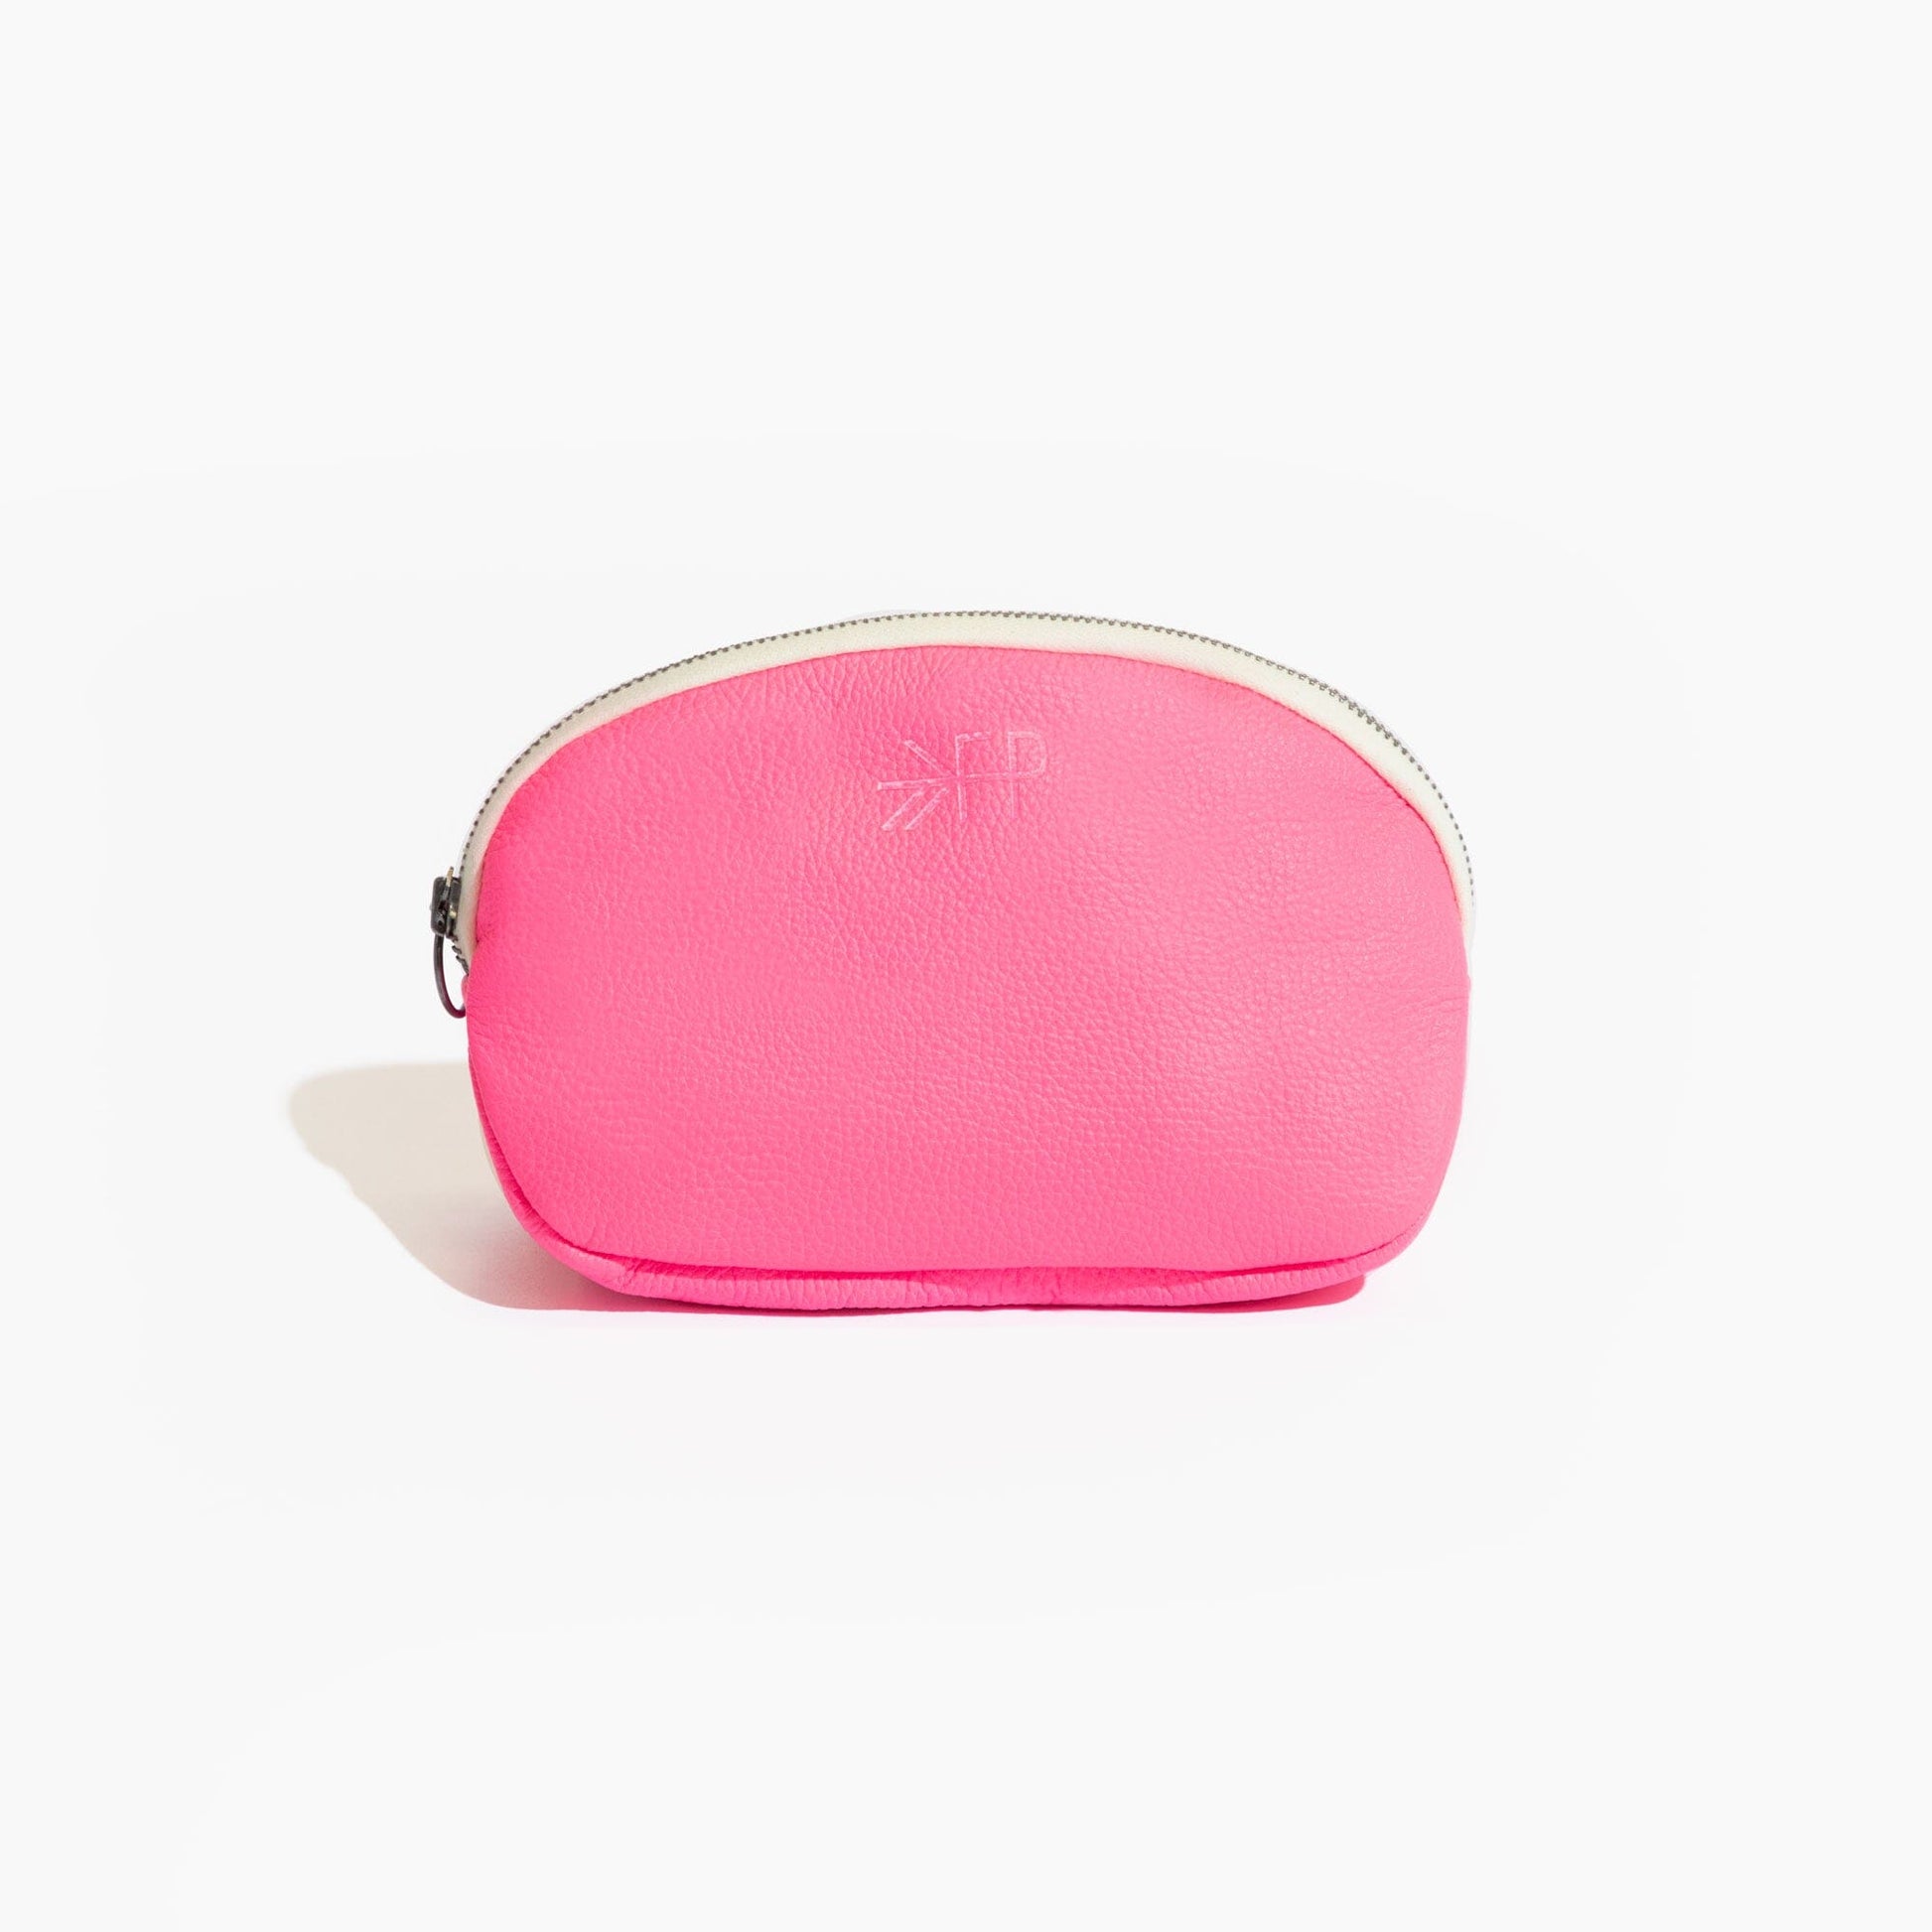 Dreamhouse Pink Cosmetic Pouch Cosmetic Pouch In House Bag 